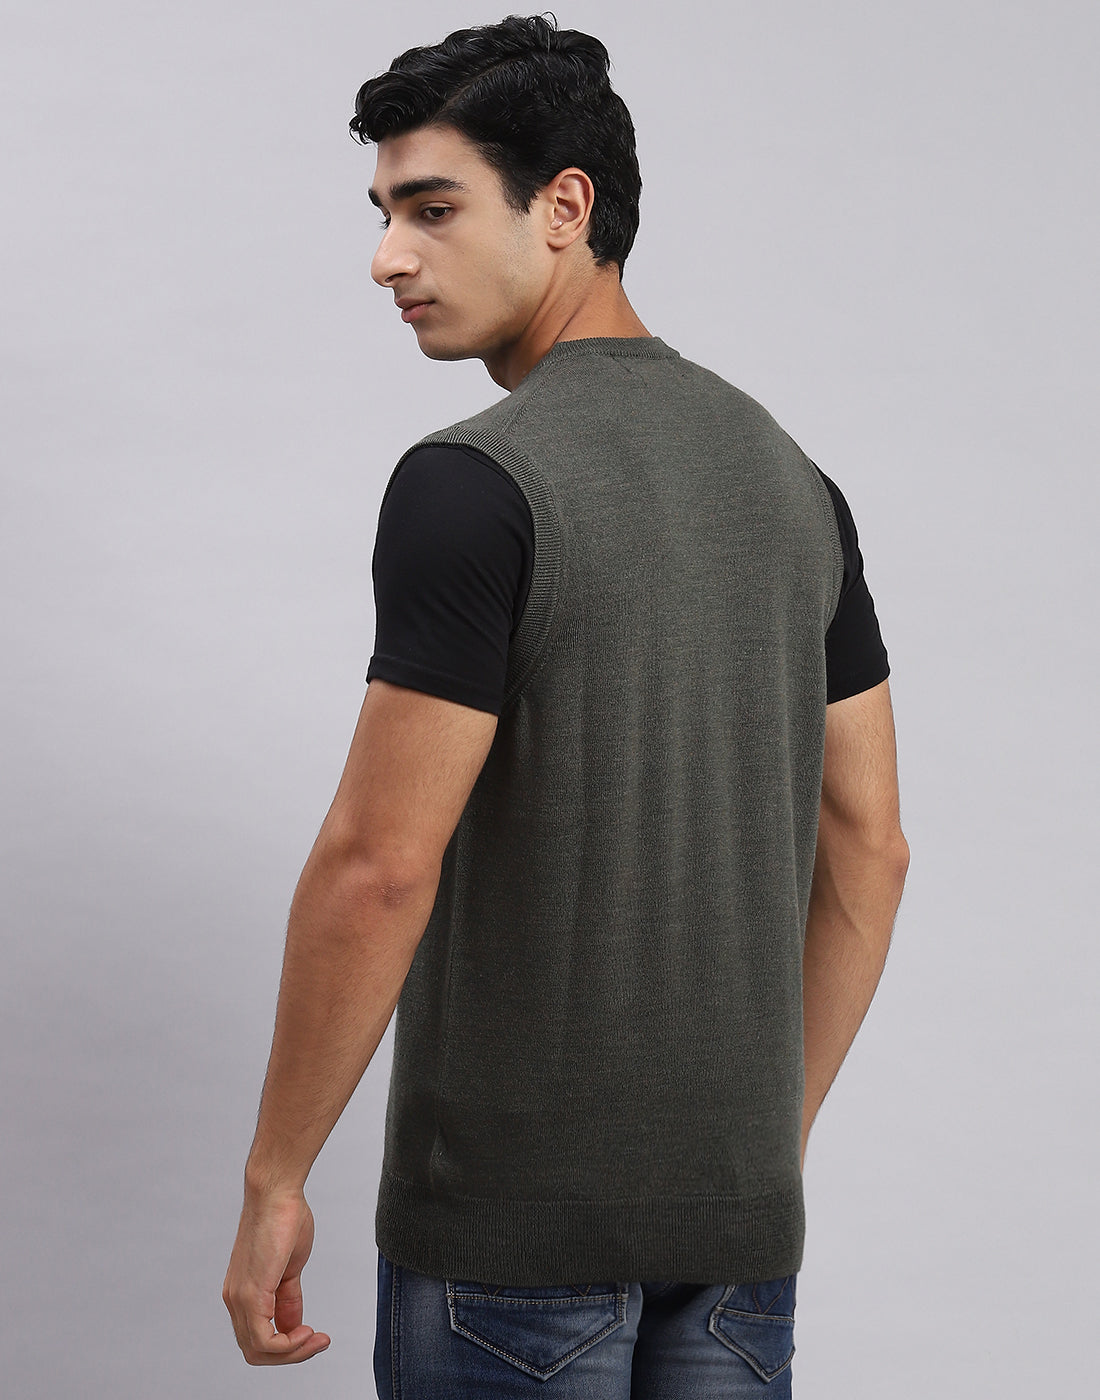 Men Olive Solid V Neck Sleeveless Sweaters/Pullovers